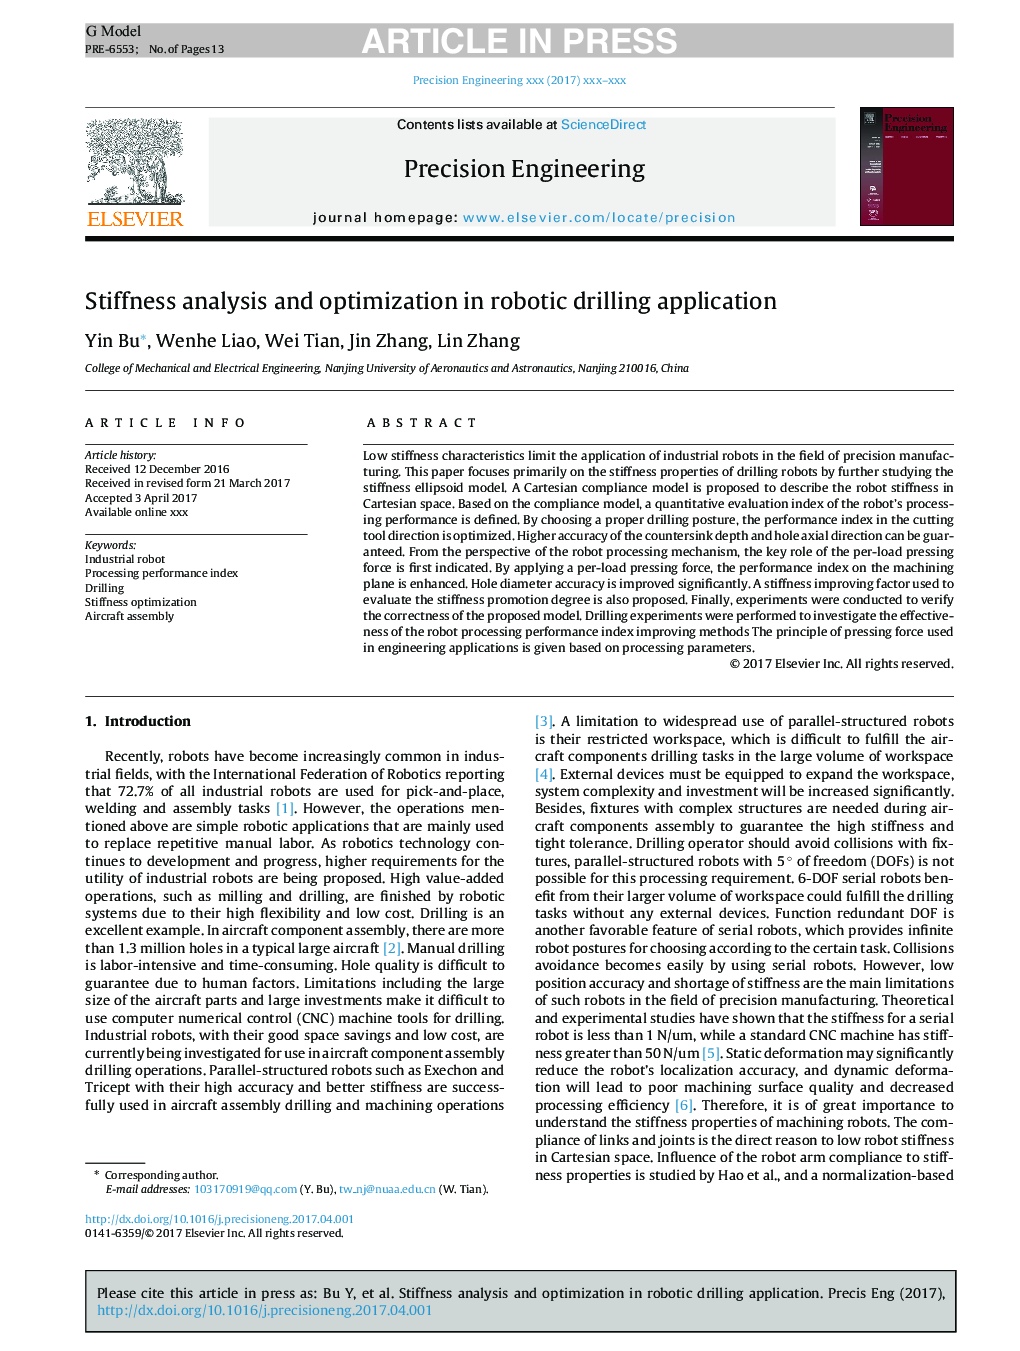 Stiffness analysis and optimization in robotic drilling application